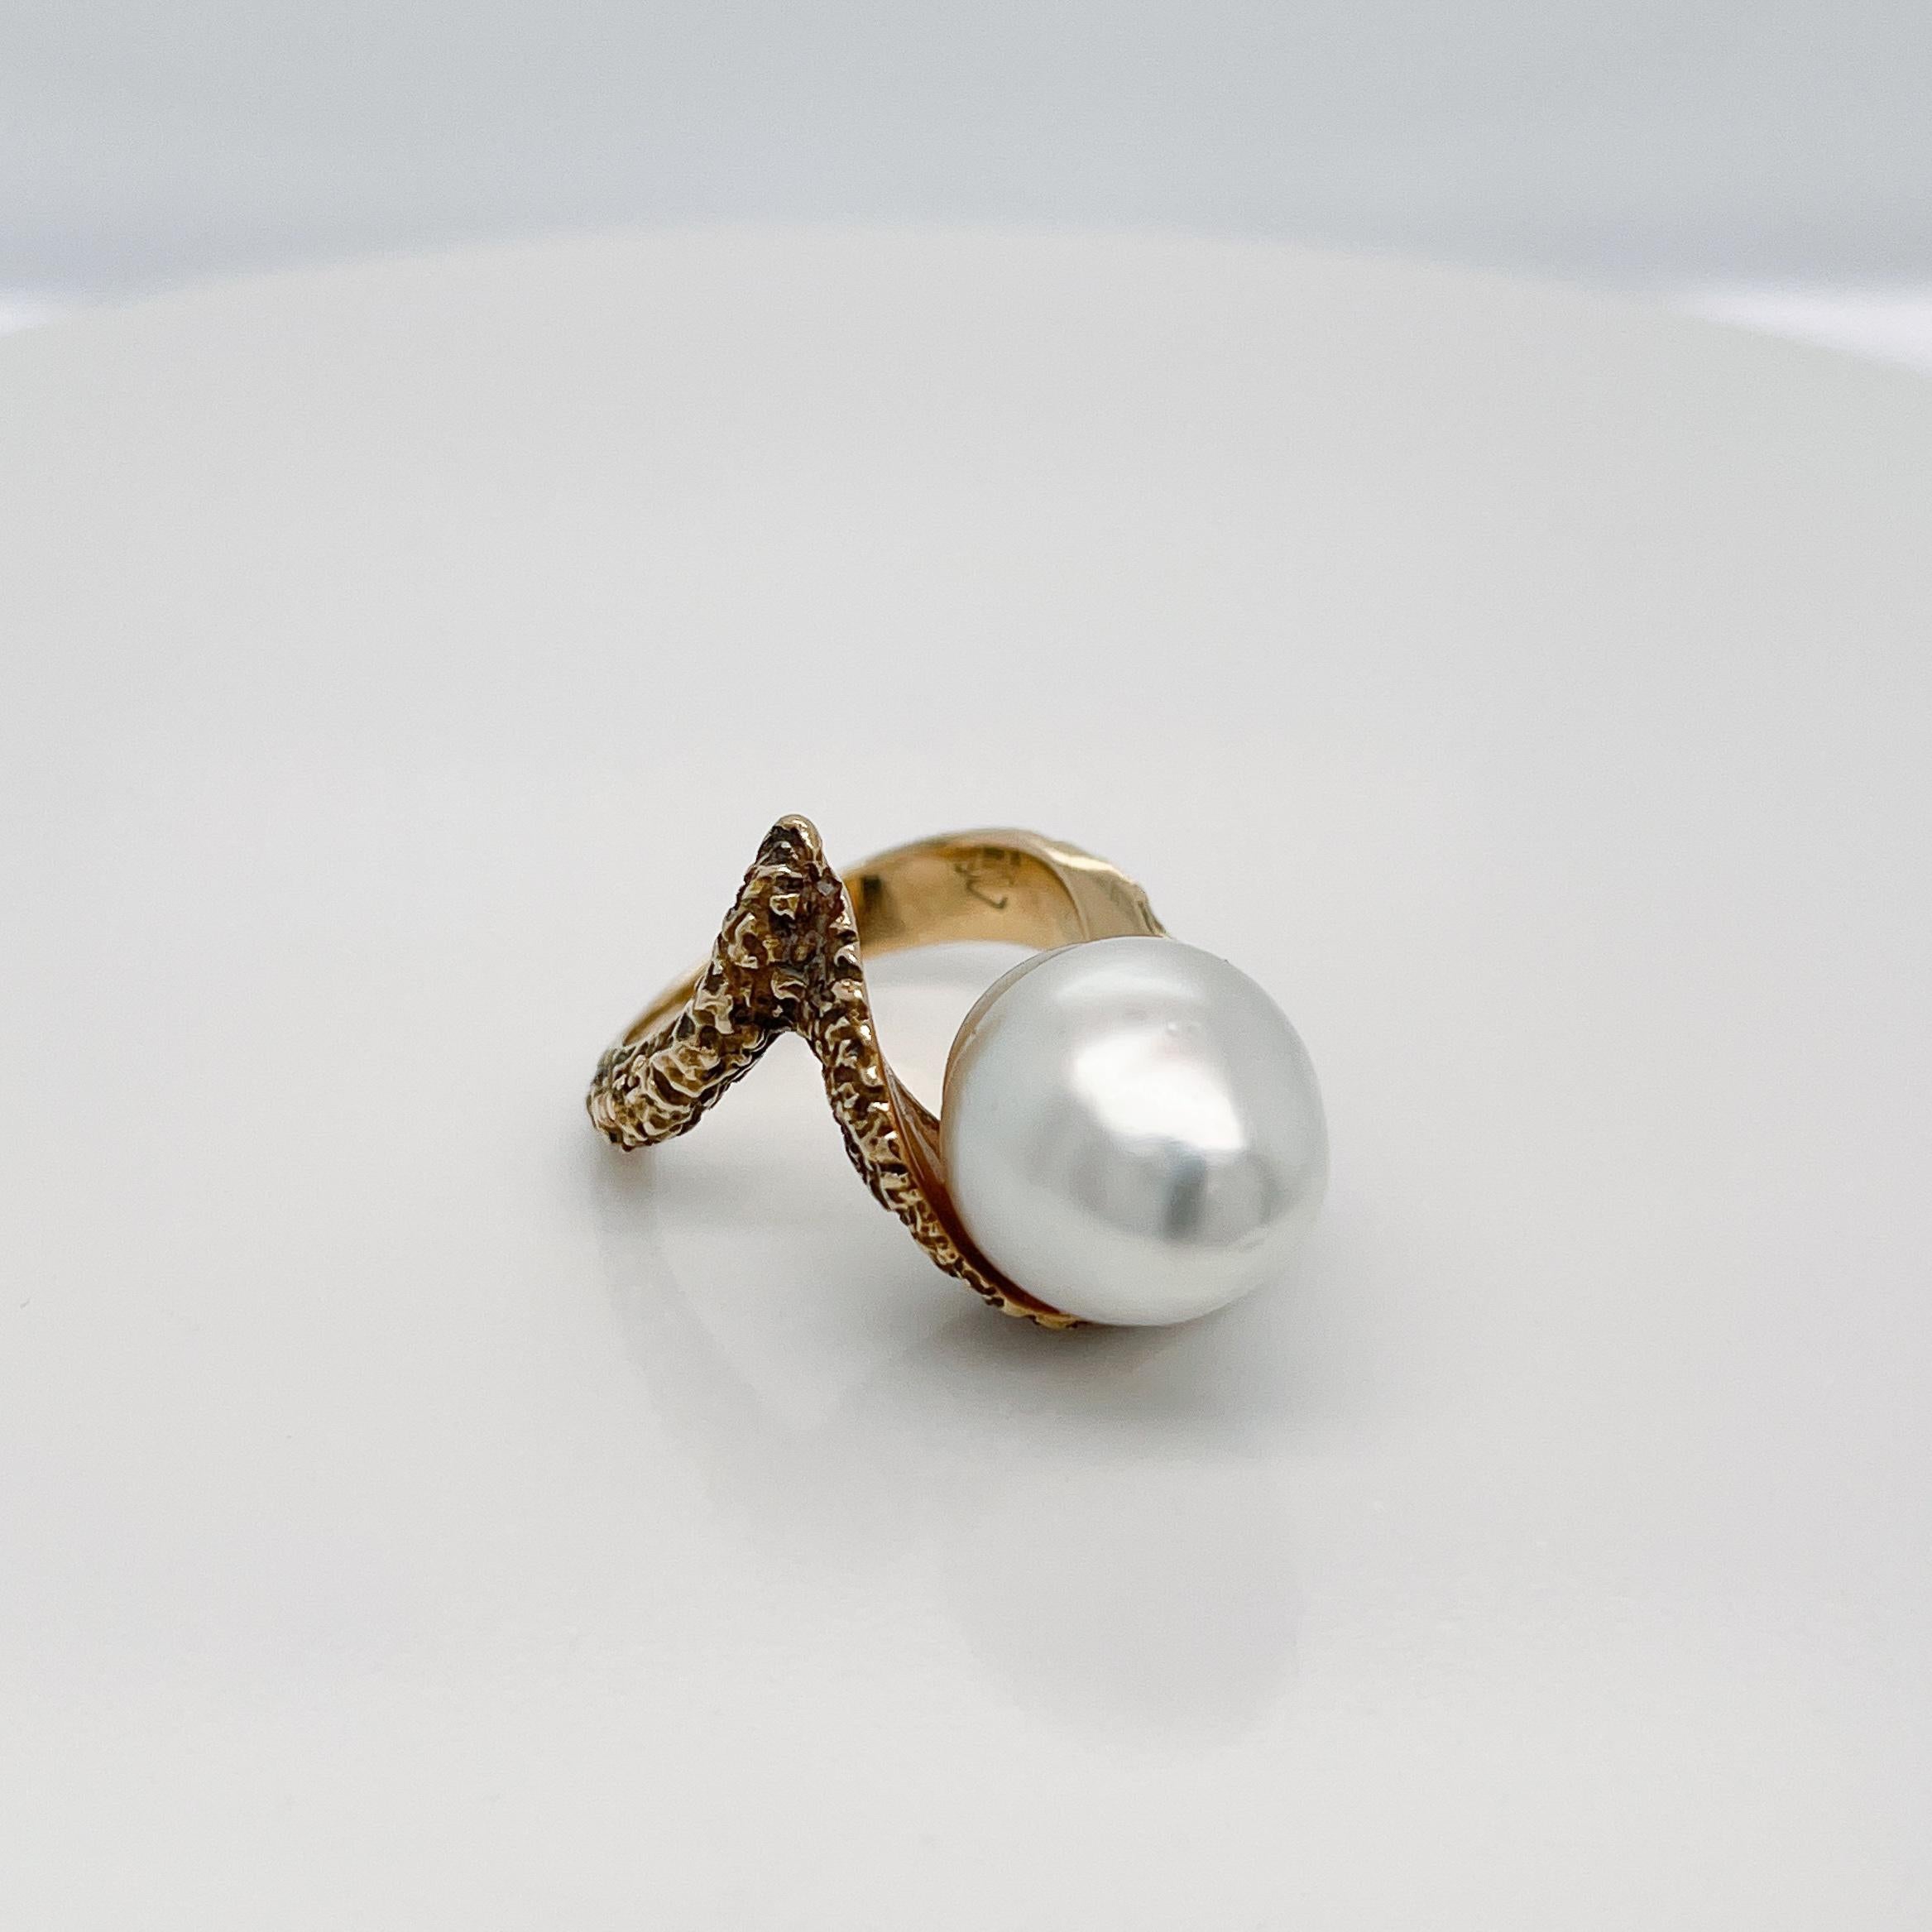 Vintage Brutalist Textured 14 Karat Yellow Gold & Baroque Pearl Cocktail Ring For Sale 2